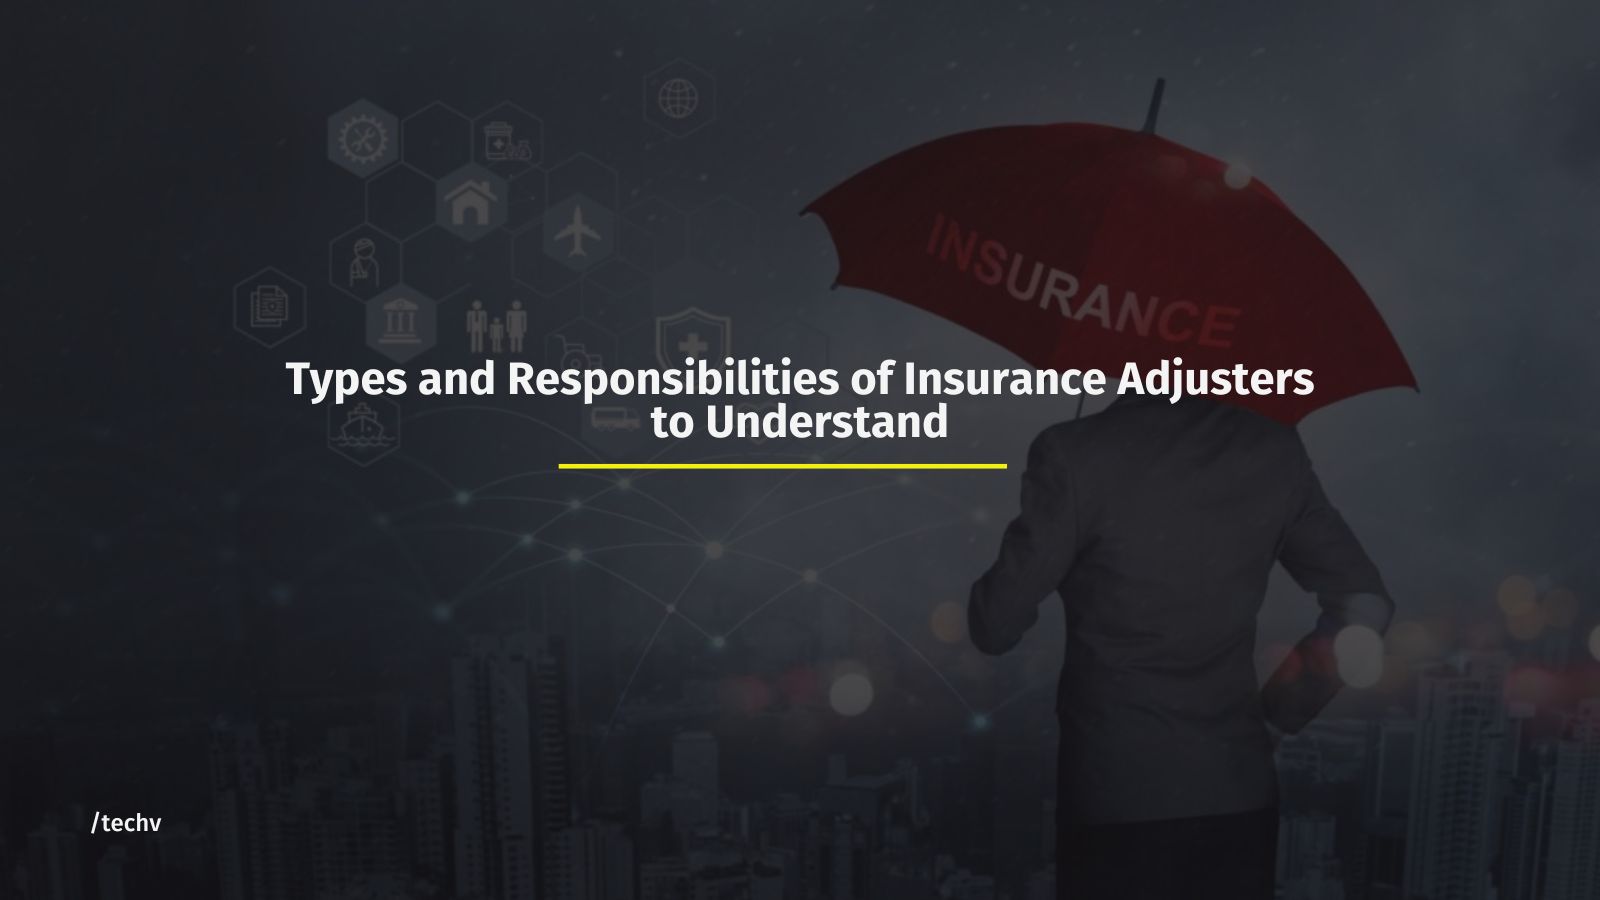 Types and Responsibilities of Insurance Adjusters to Understand